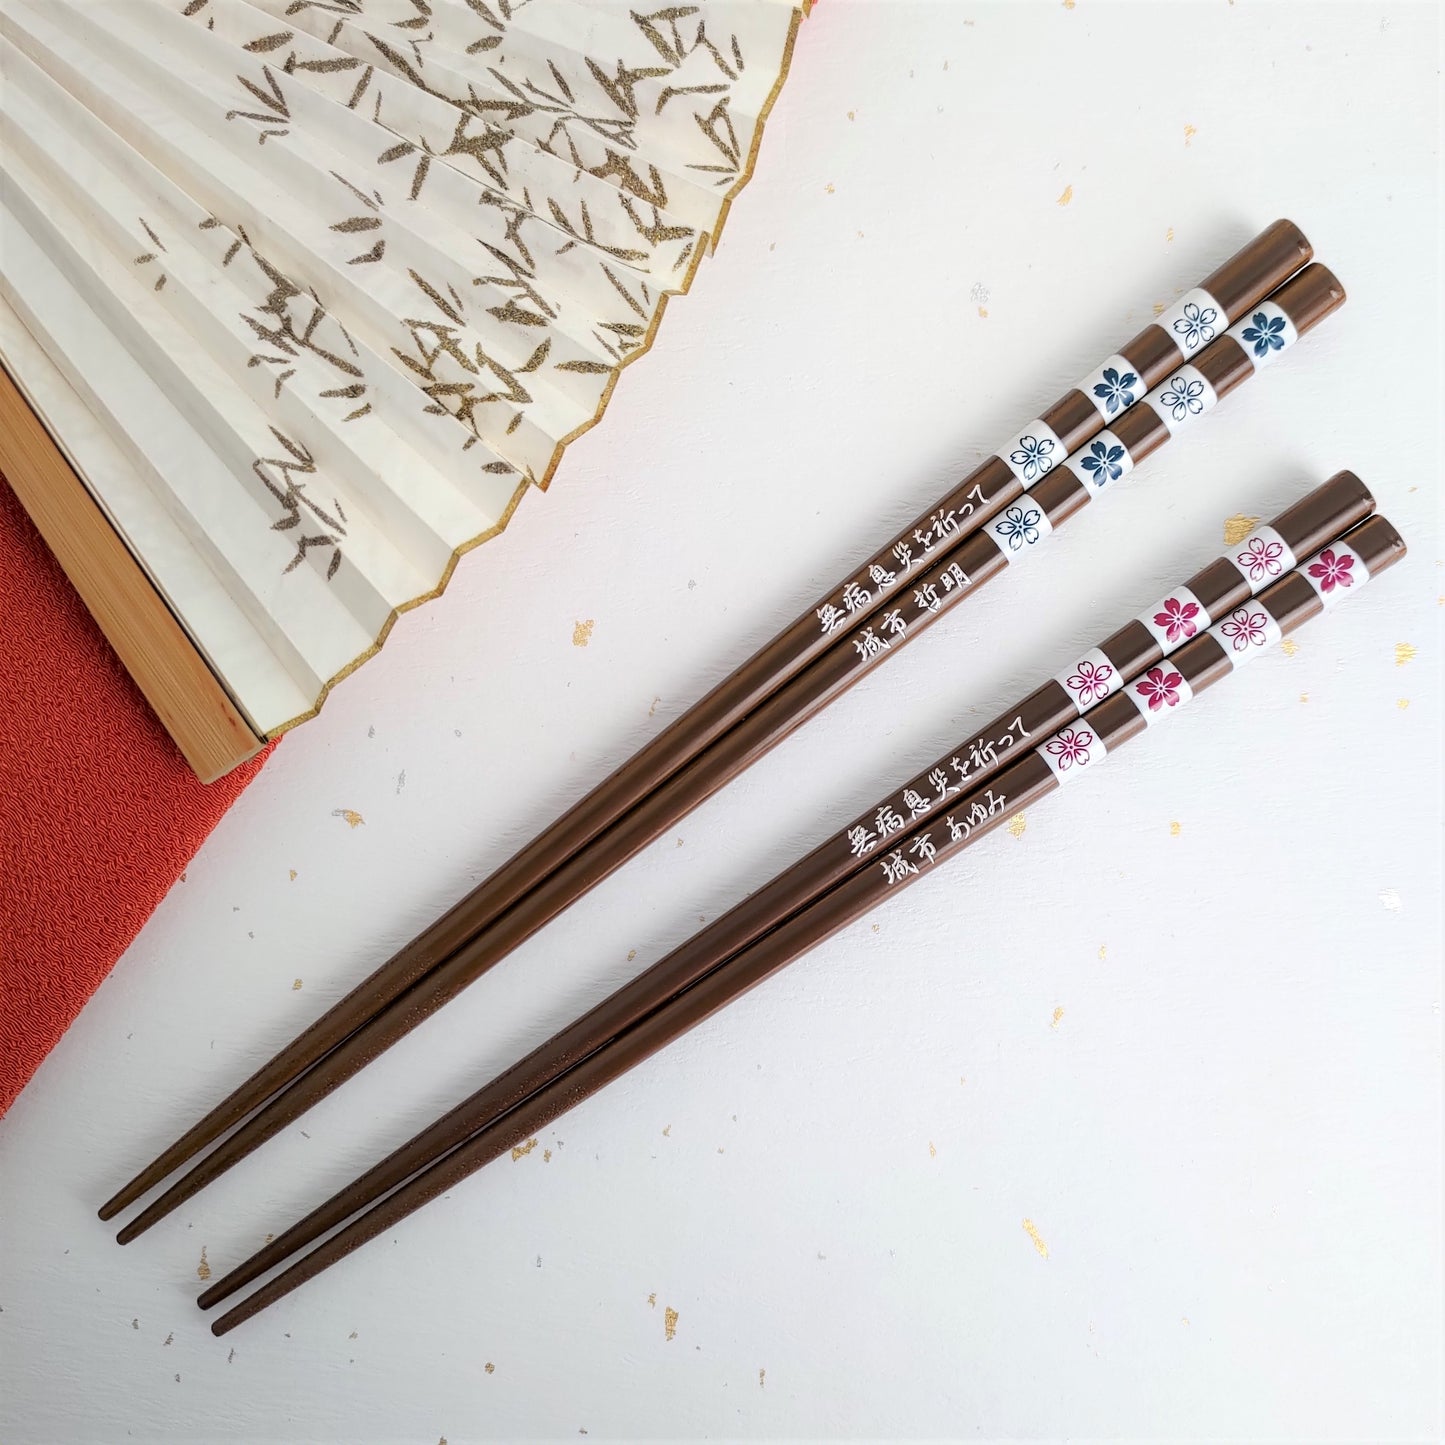 Square Cherry blossom magnetism Japanese chopsticks blue pink - SINGLE PAIR WITH ENGRAVED WOODEN BOX SET